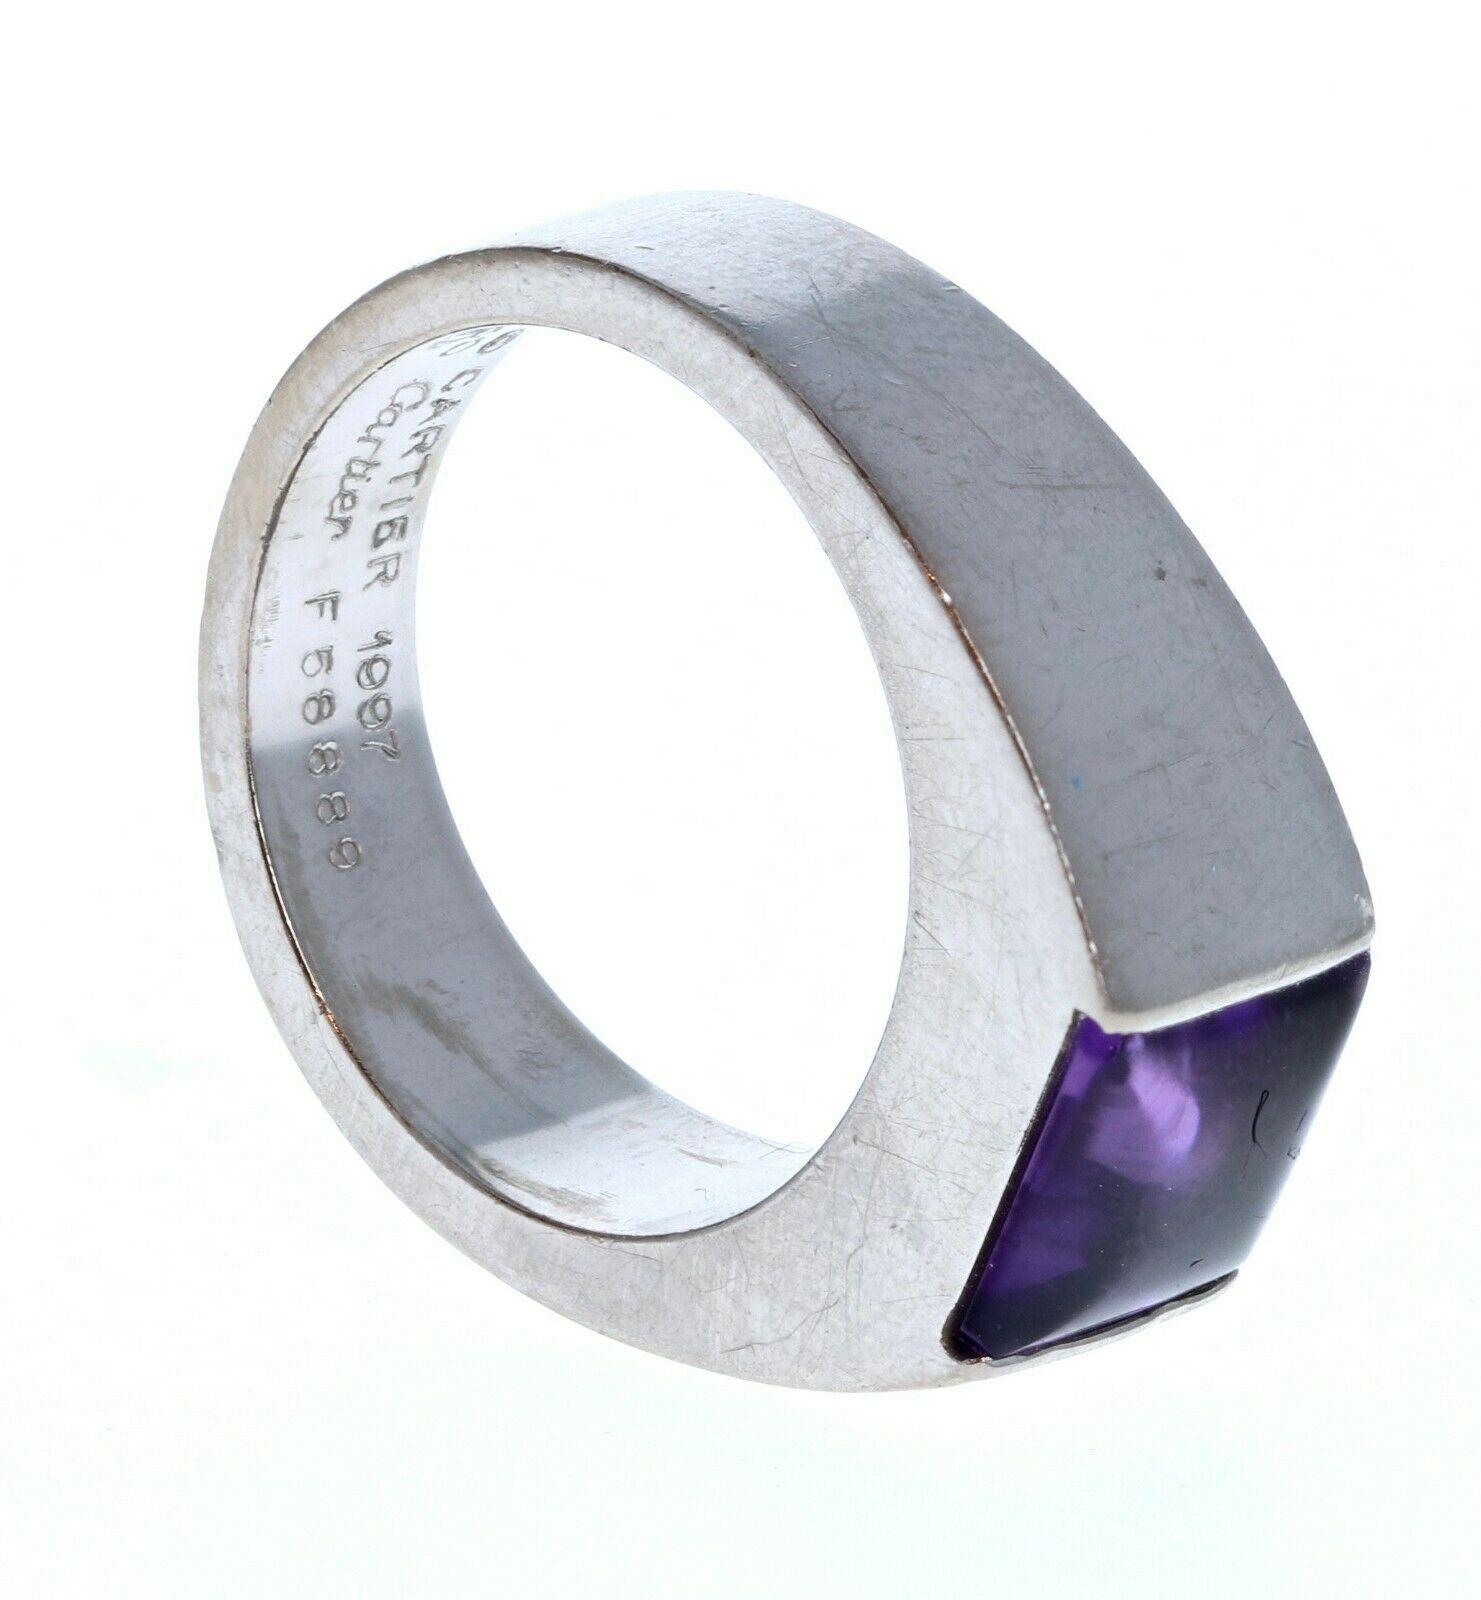 Authentic Cartier Tank 18K White Gold & Amethyst Ring 13.4g Size 53

For sale is a 18K white gold Cartier Tank wide Ring 
The ring is a size a EU 53 / US 6.5
1 amethyst  
 Perfect worn day or night.
 Get this stunning ring now!



Metal: 18k white